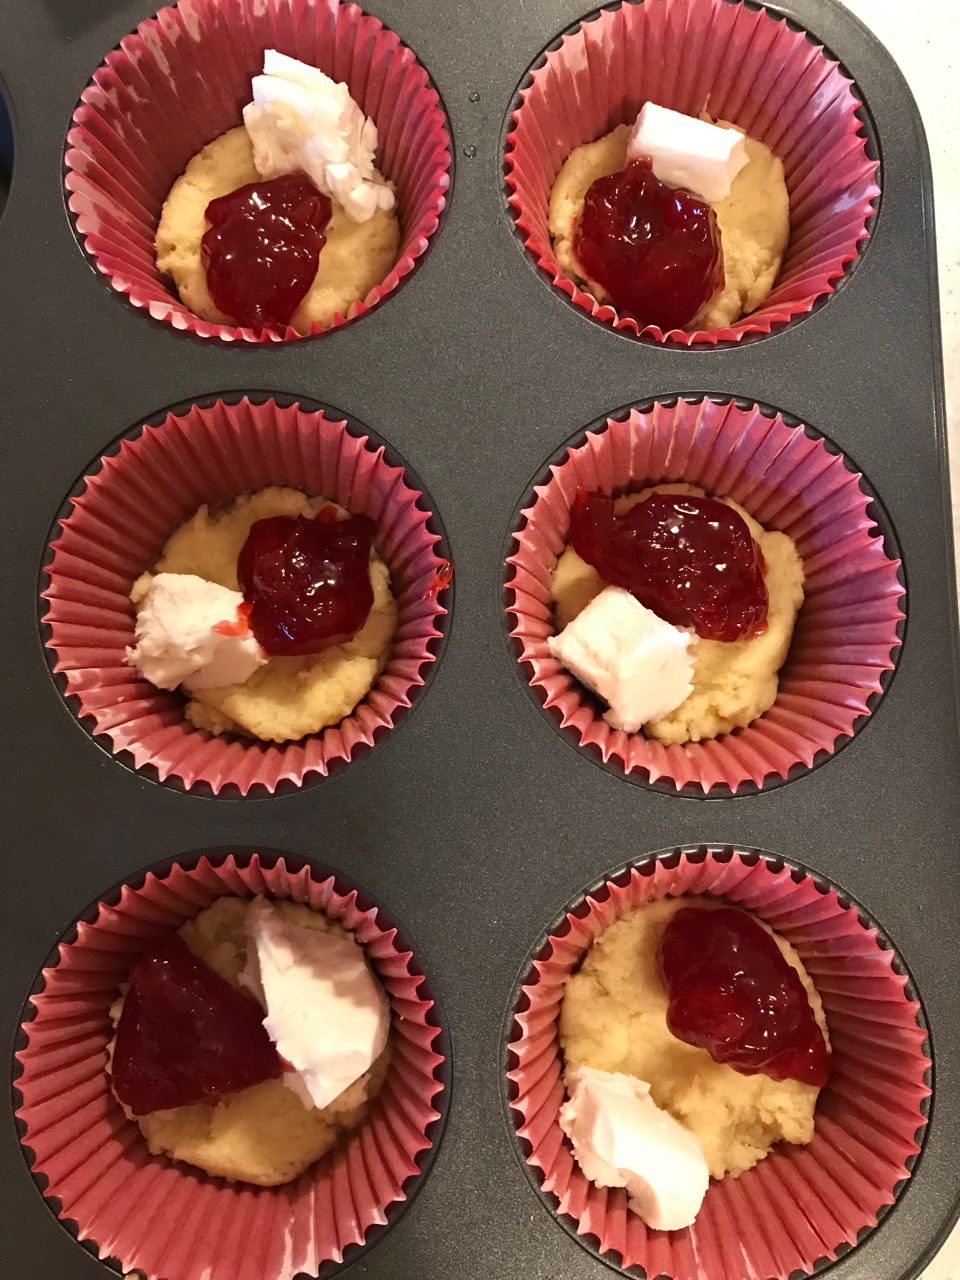 Cherry Cheese Mini Coffeecakes | A gluten and dairy free twist on classic cherry coffeecake. These single serving cakes include layers of cherry pie filling and dairy free cream "cheese". | Eat Something Delicious